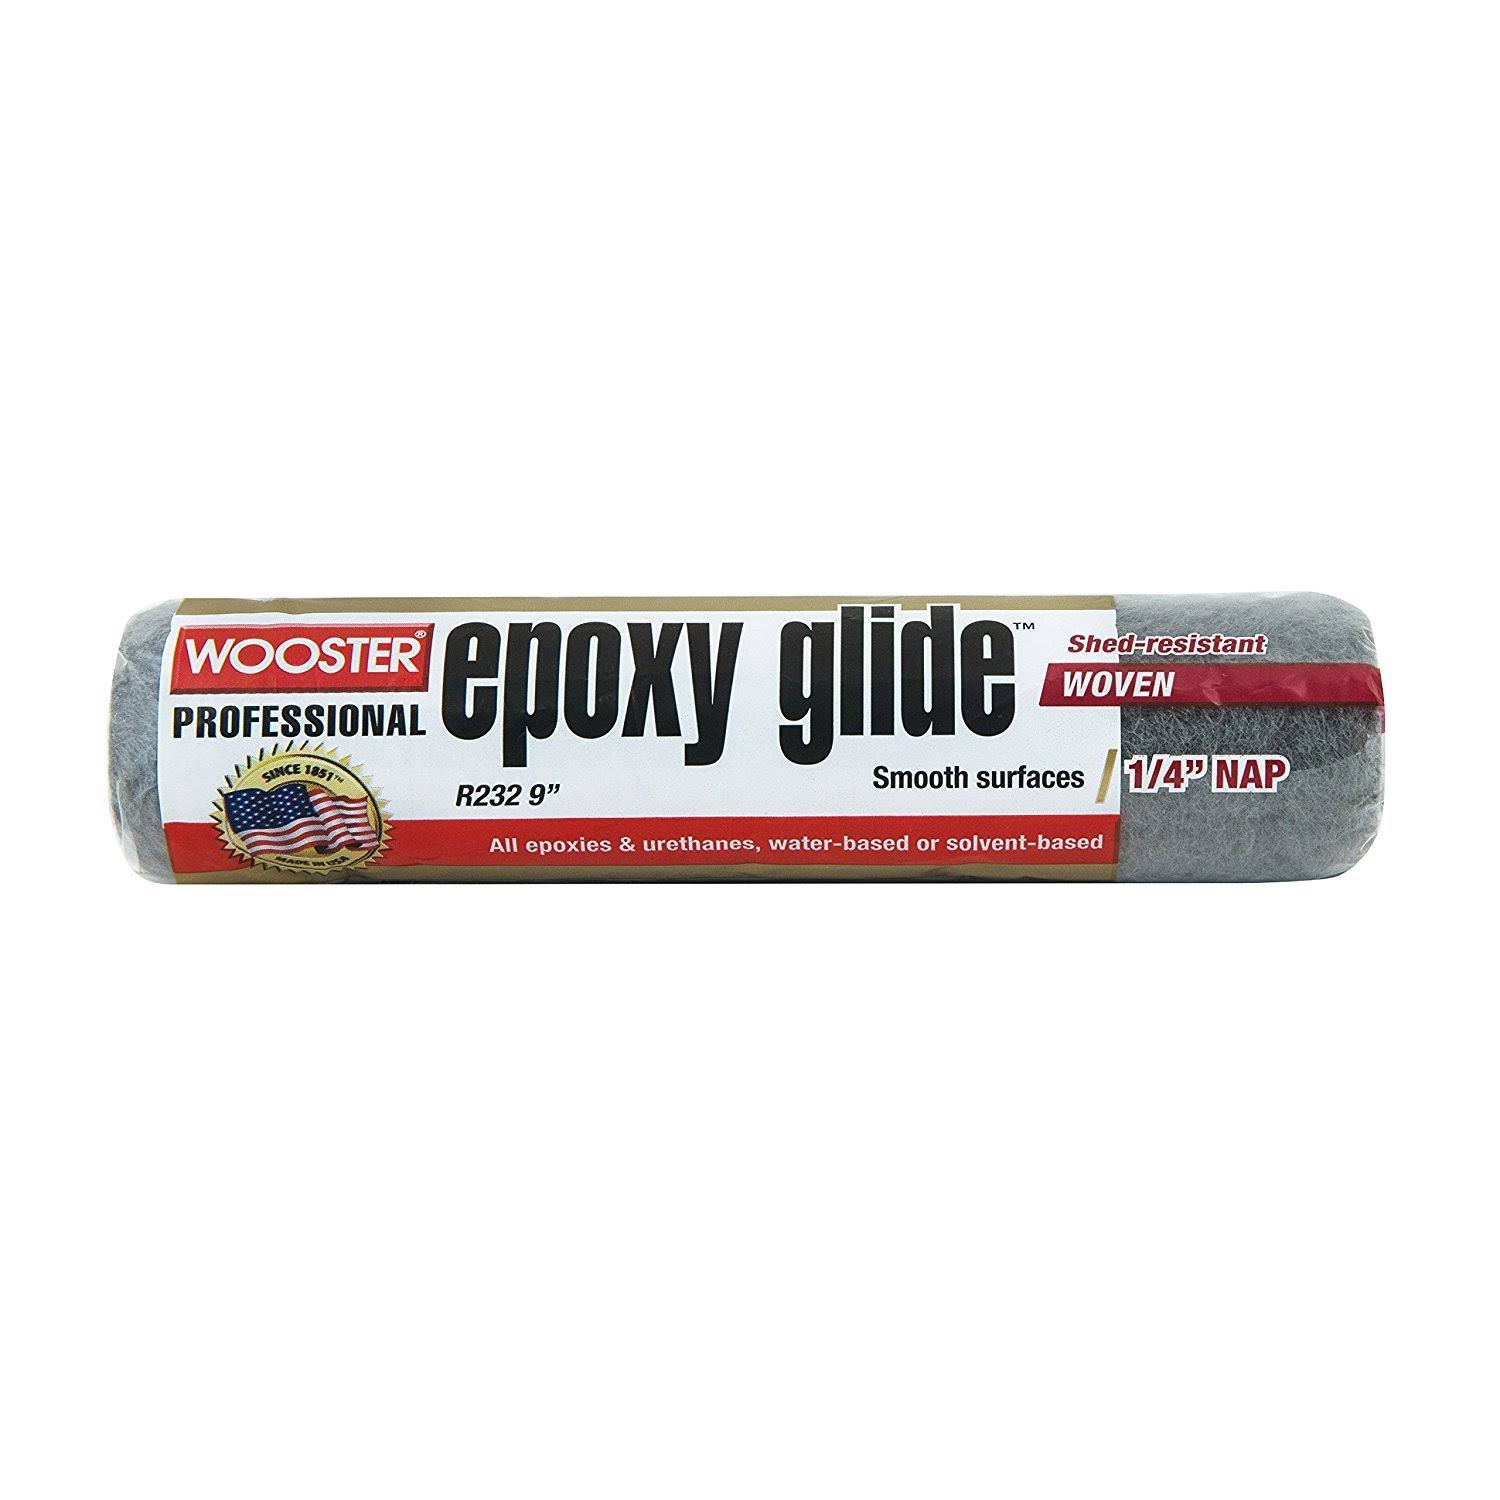 Wooster Brush Epoxy Glide Roller Cover - 1/4" x 9"